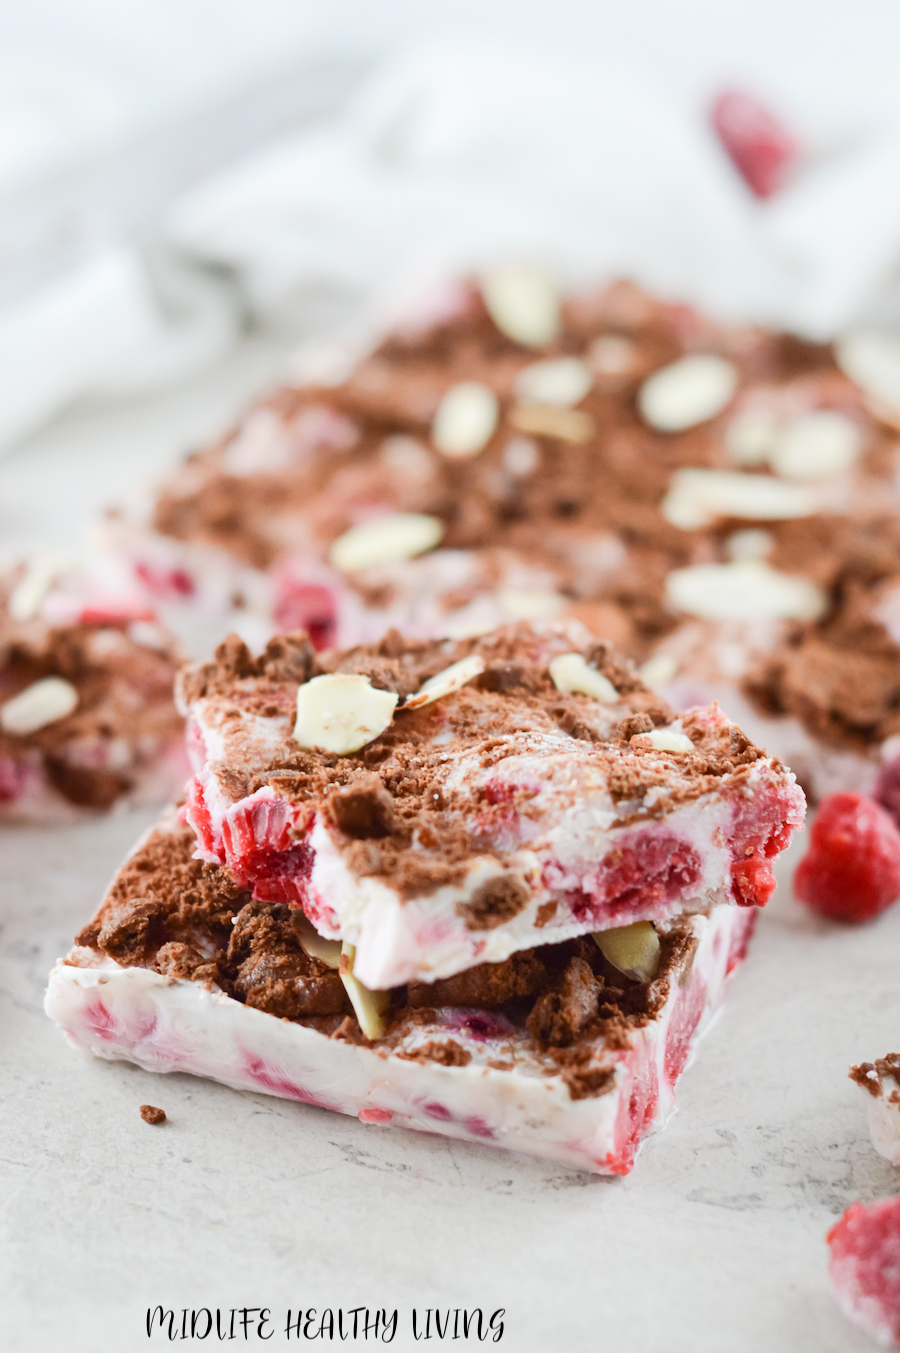 A look at the finished and cut weight watchers frozen yogurt bark that is ready to serve. 